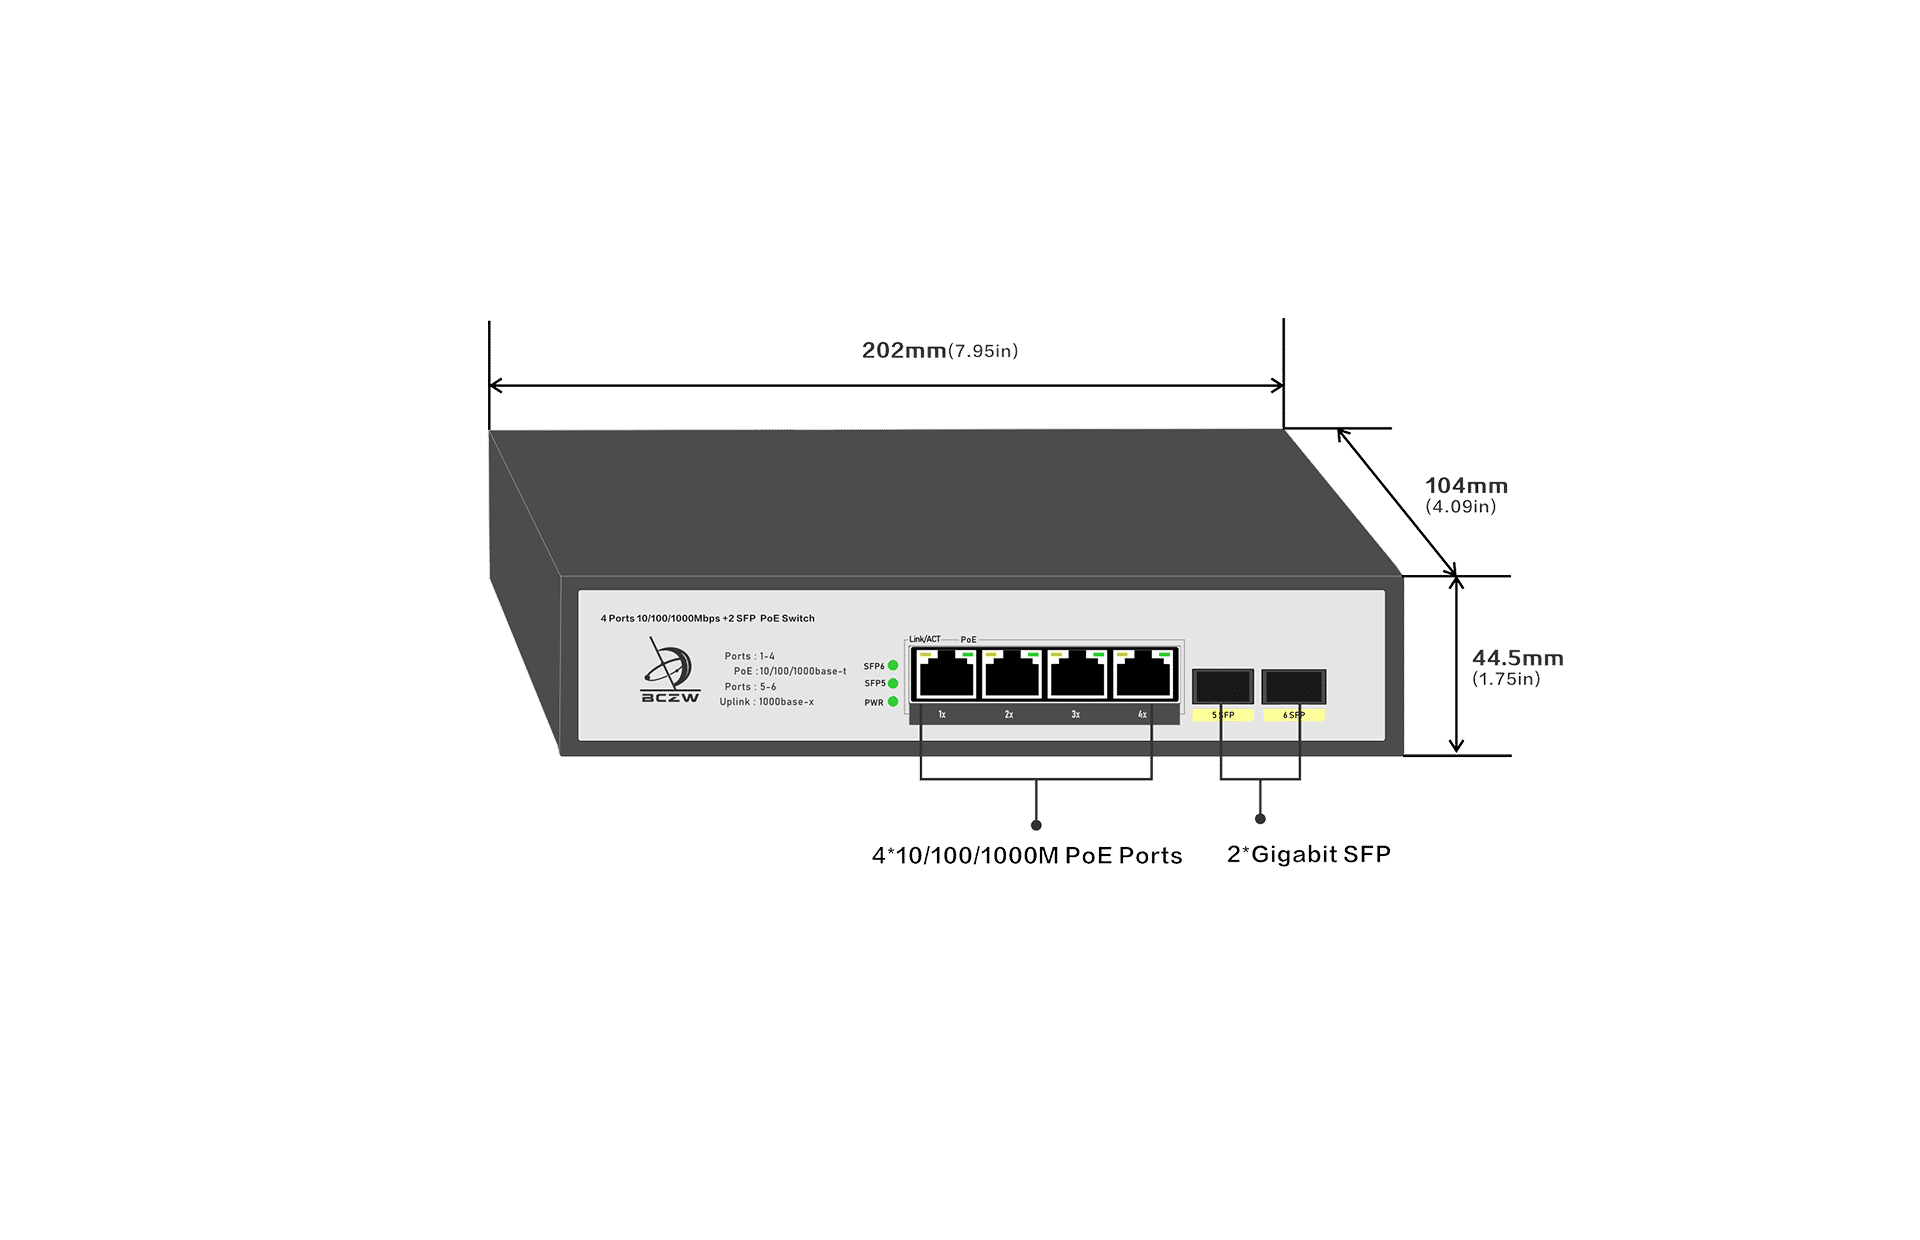 4 Ports 10/100/1000Mbps PoE Switch with 2 SFP Uplink size